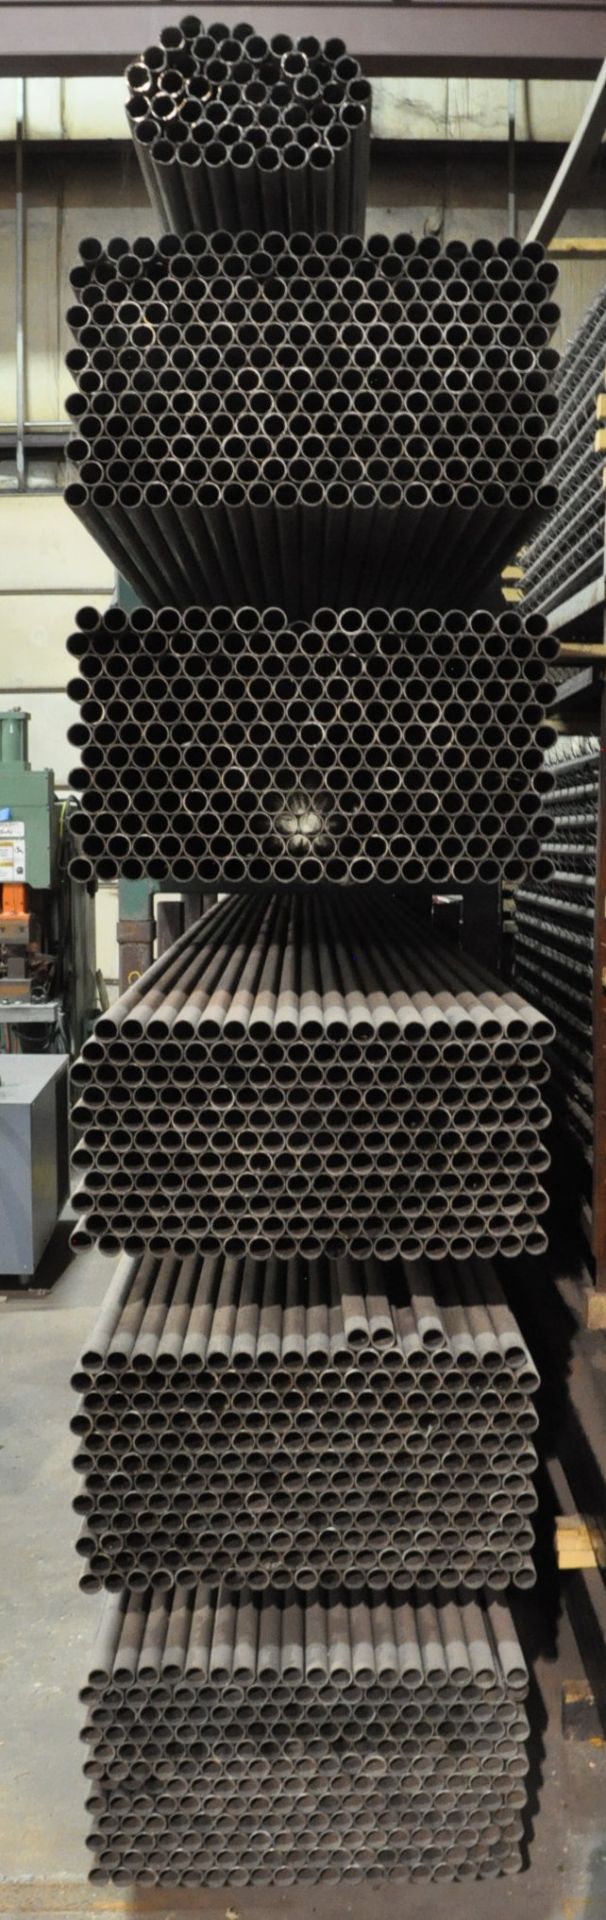 Lot -1163 pcs. 1.250” O.D. x 16 ga. wall x 15’ 7/8” Steel Hollow Tube Stock with (5) Stock Carriers - Image 2 of 3